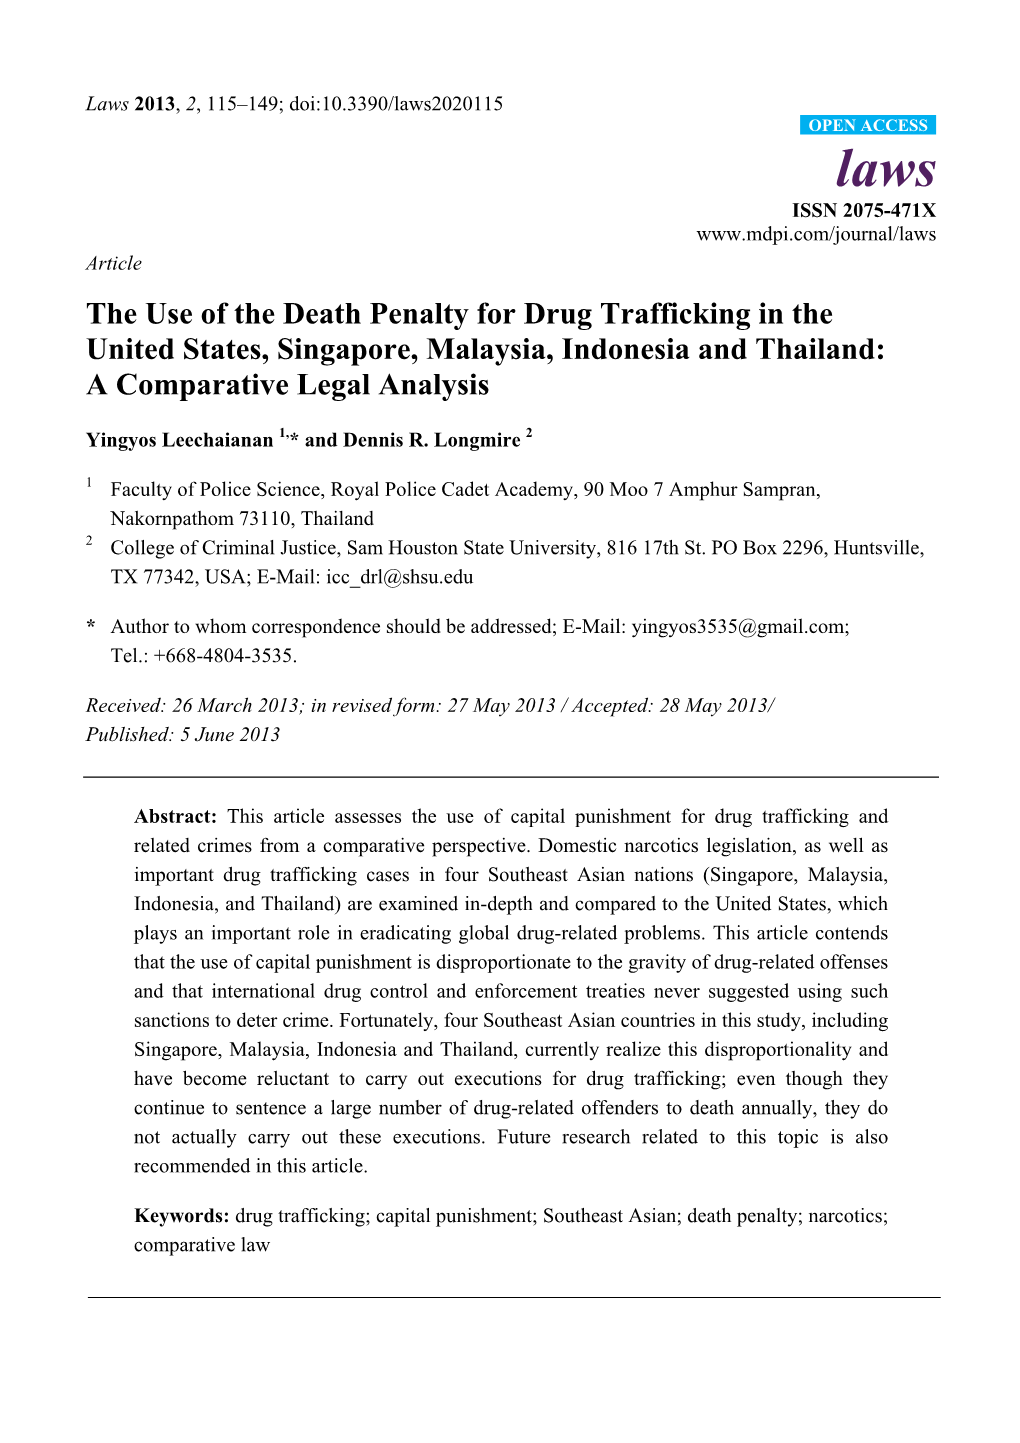 The Use of the Death Penalty for Drug Trafficking in the United States, Singapore, Malaysia, Indonesia and Thailand: a Comparative Legal Analysis